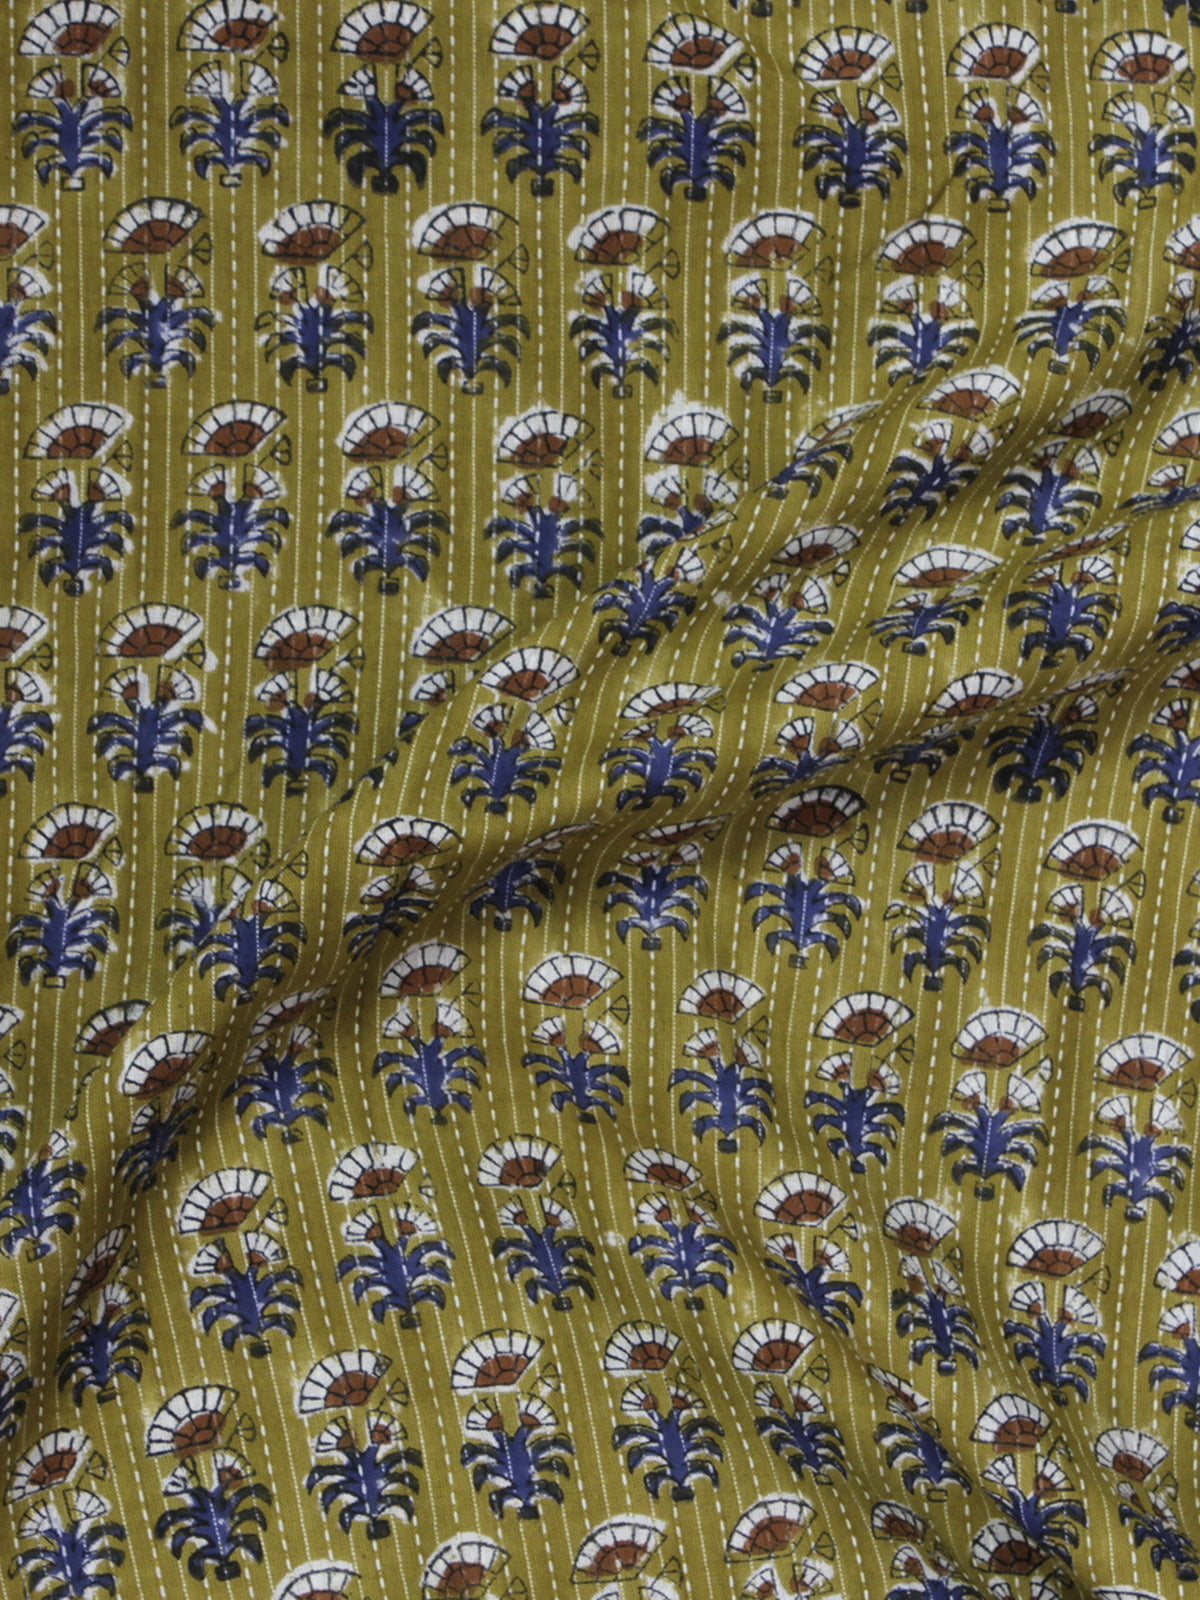 Olive Green Ivory Blue Brown Kantha Embroidered Hand Block Printed Cotton Fabric - F001F563